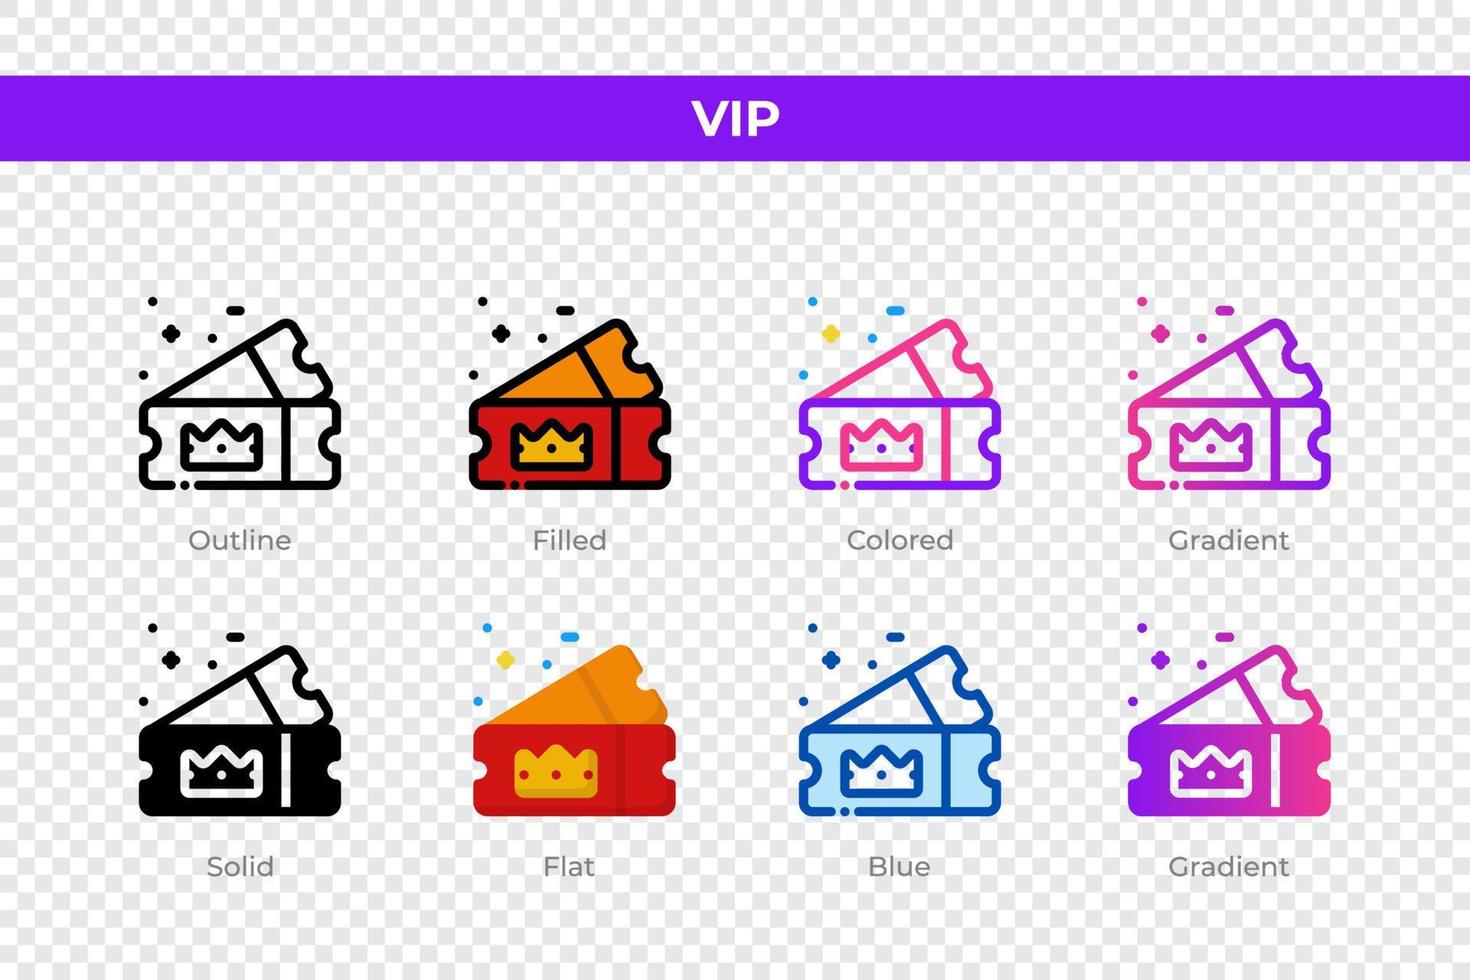 Vip icons in different style. Vip icons set. Holiday symbol. Different style icons set. Vector illustration